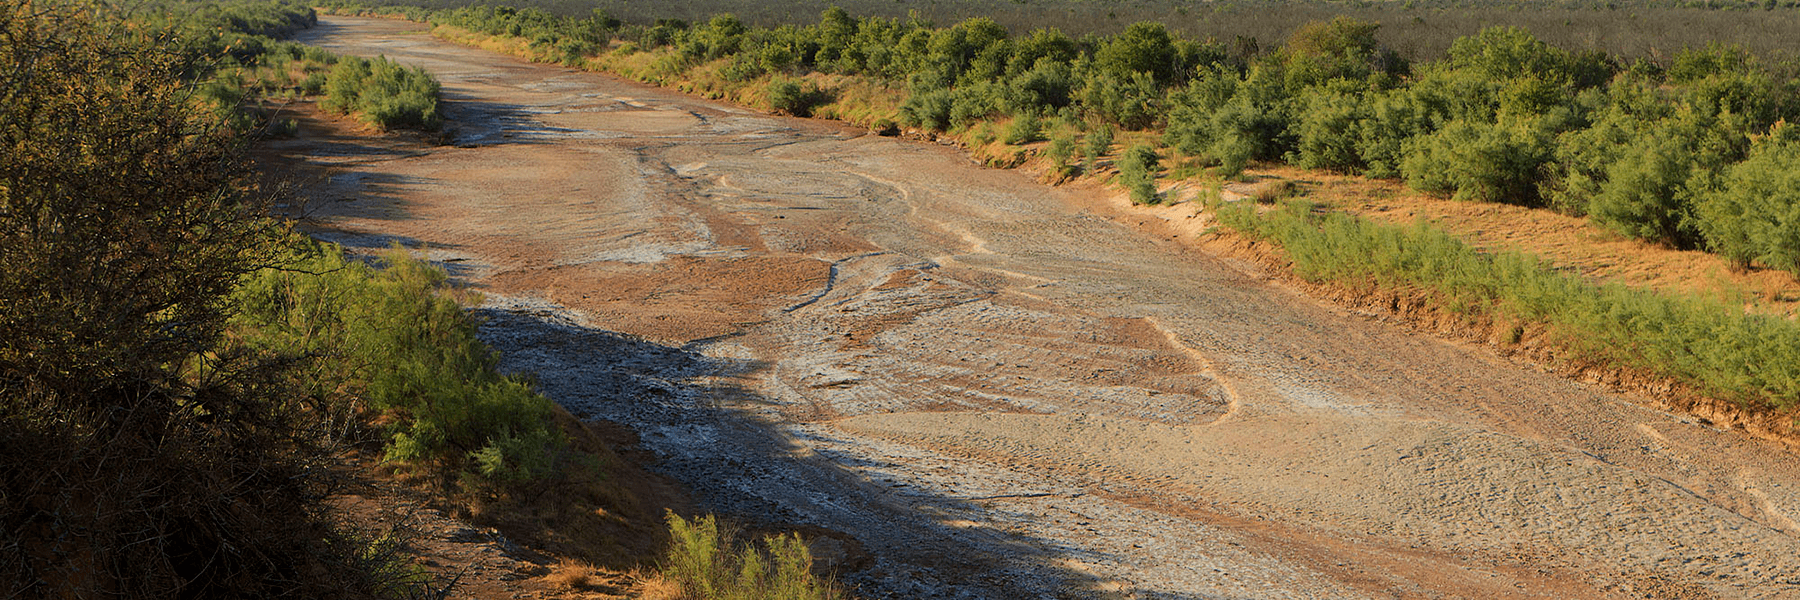 Brazos River in Knox County, Texas runs dry in summer 2011. 